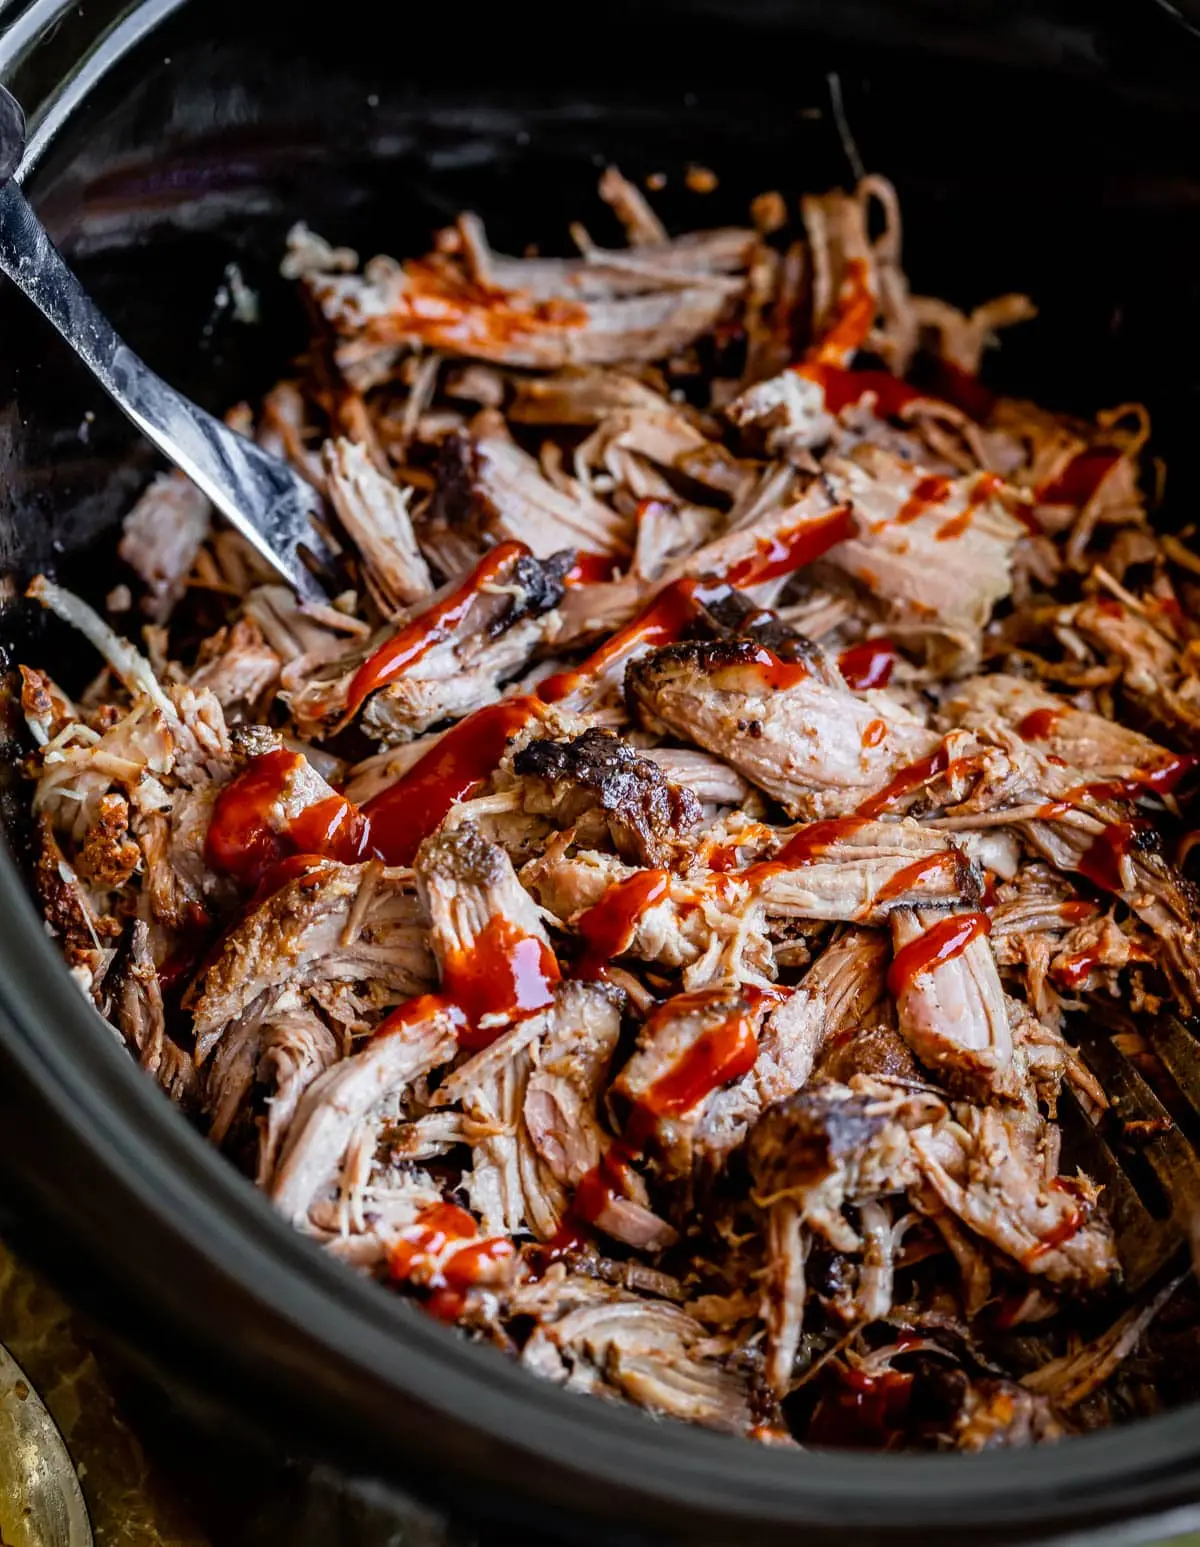 smoked pulled pork crock pot - How long is too long for pulled pork in crock pot